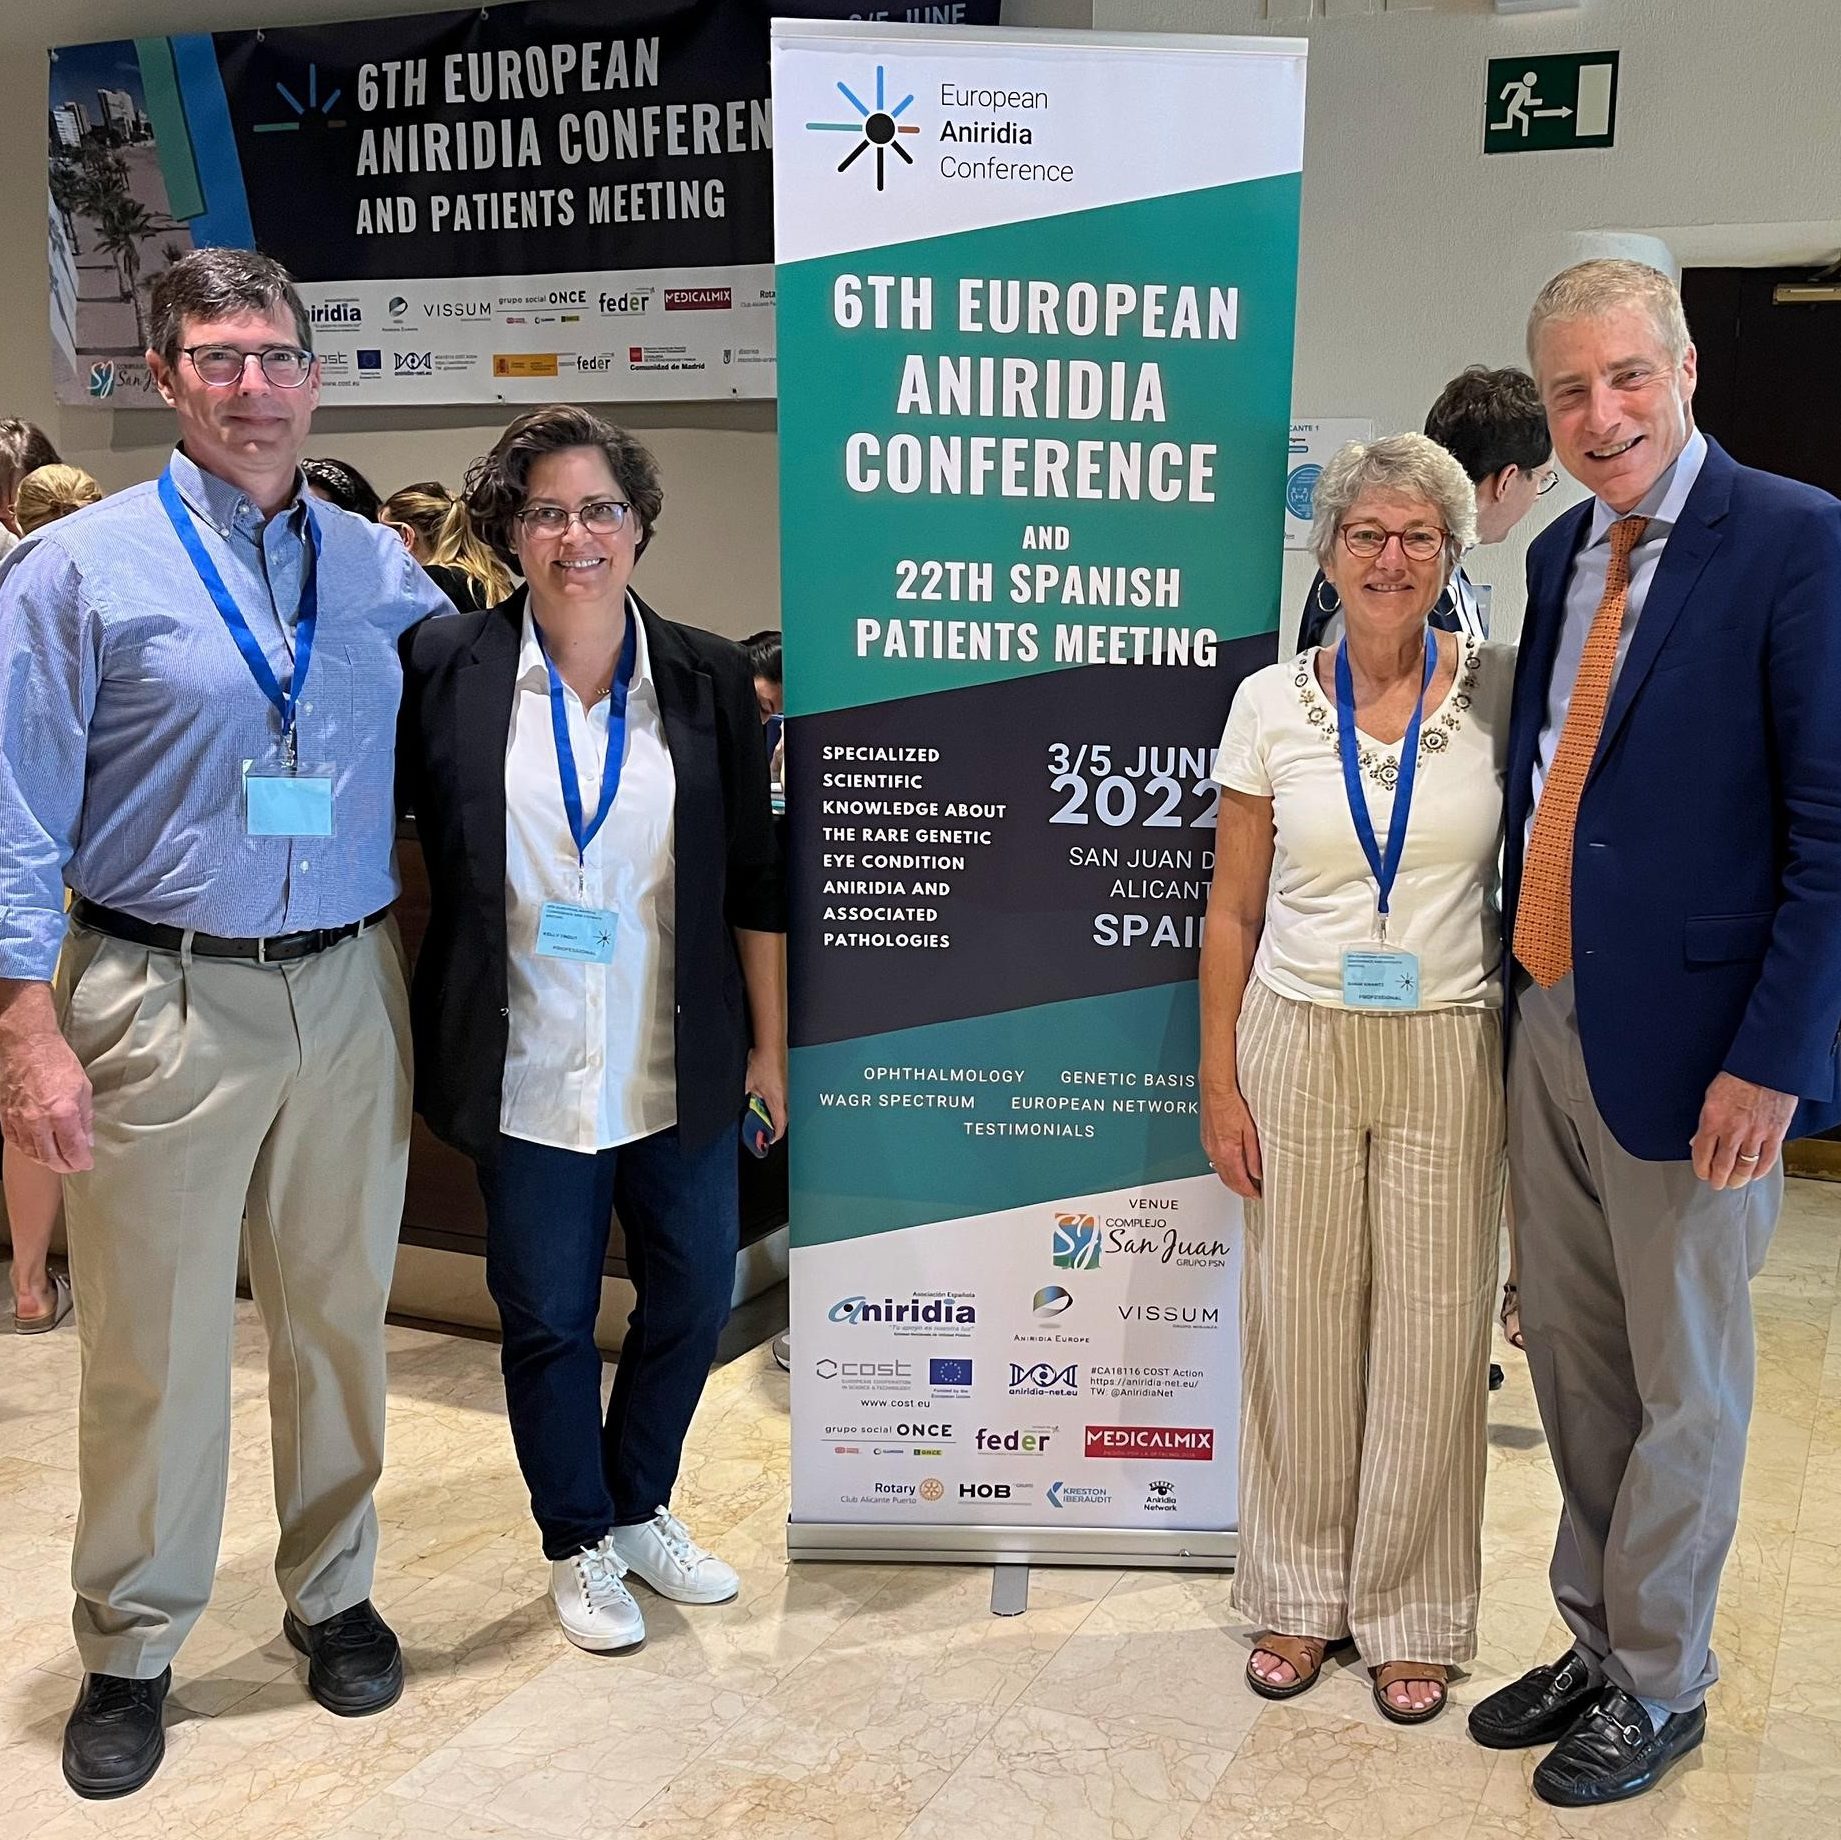 Picture is of 2 people standing next to each other, then a sign, then 2 more people.  From left is Jim Lauderdale, Kelly Trout, the 6th European Aniridia Conference sign, Shari Krantz, and Peter Netland.  